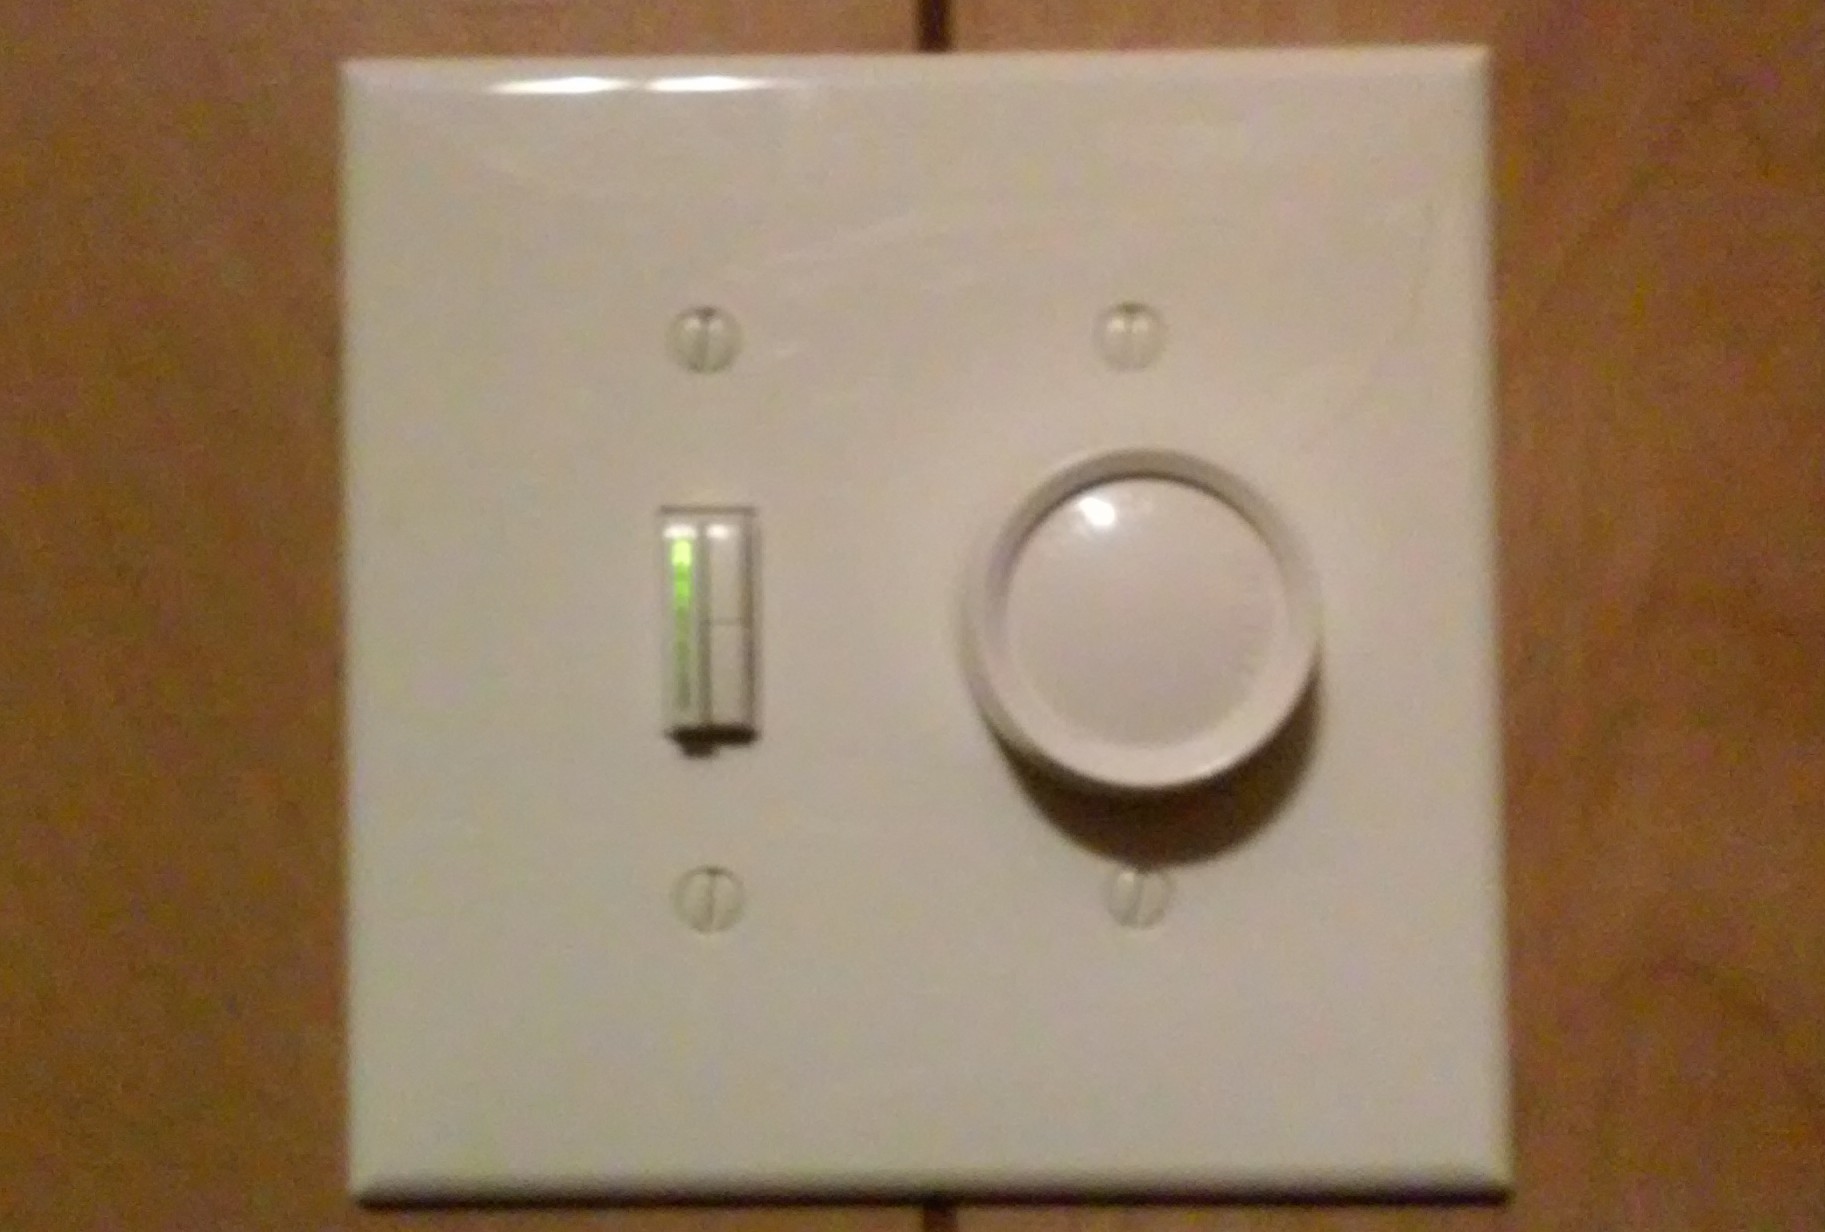 NWA Electric Installation of light dimmer/ fan switch combo.